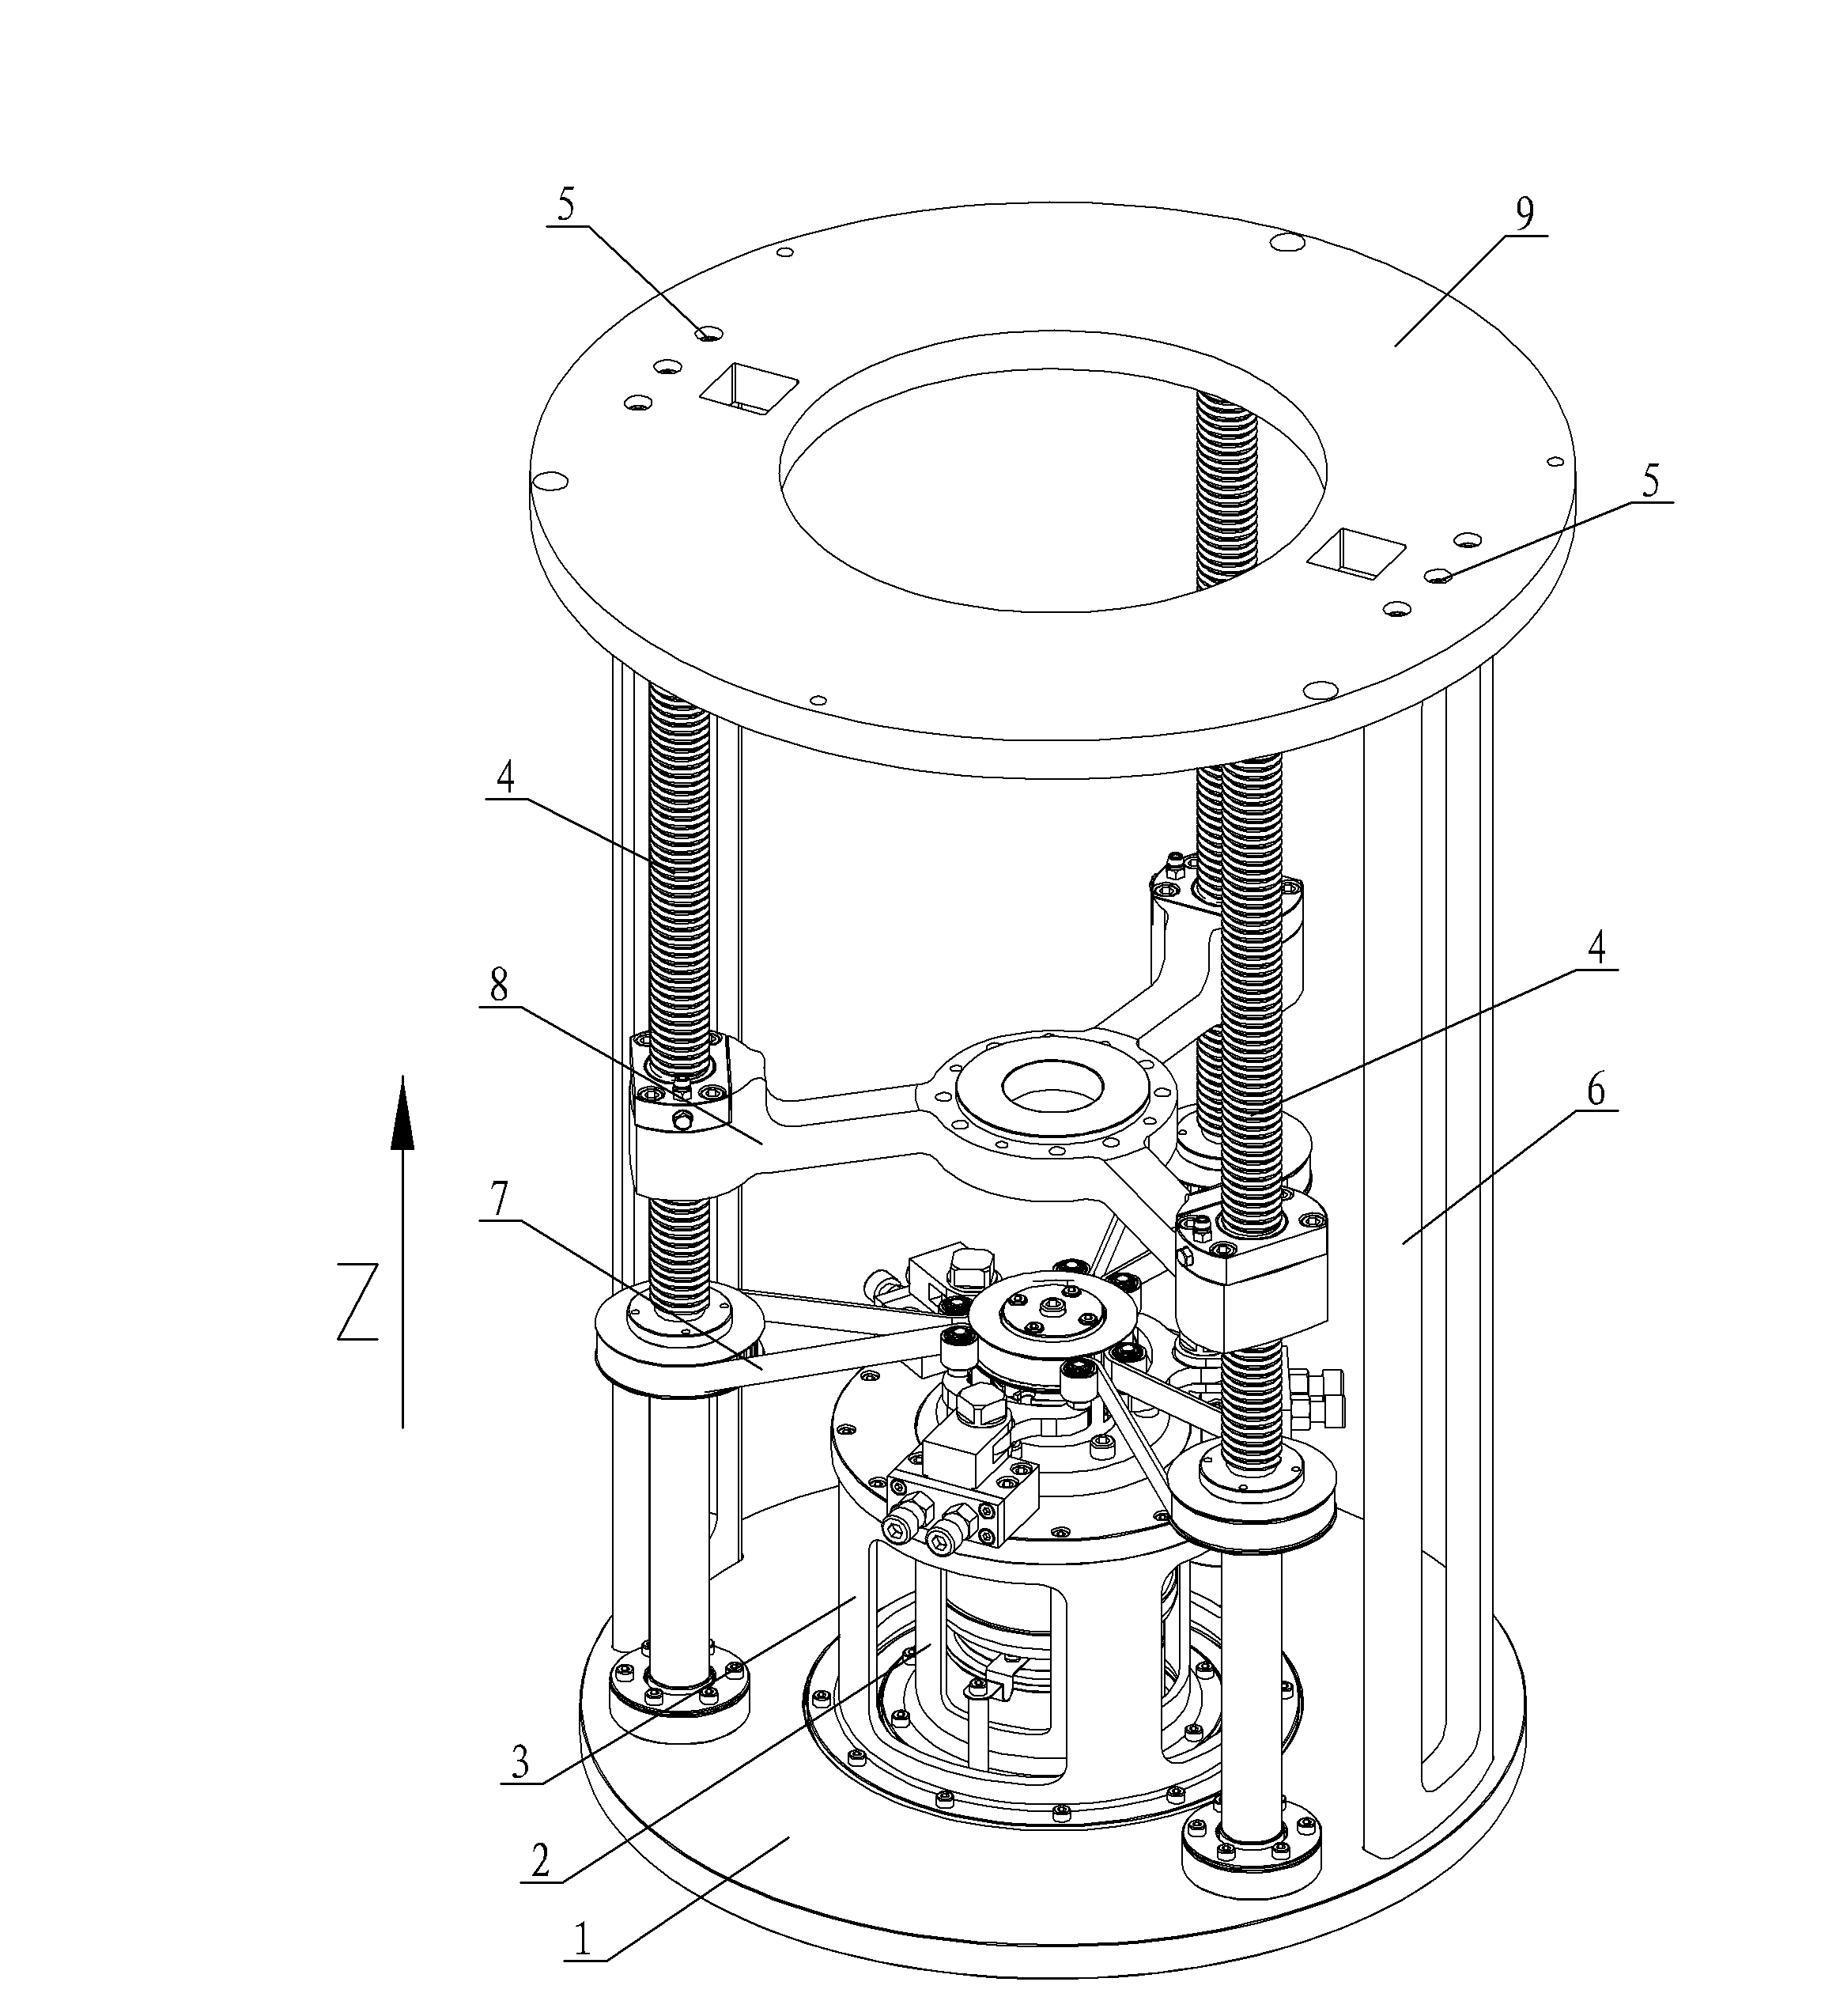 Z-axis lifting mechanism with stress state balancing function